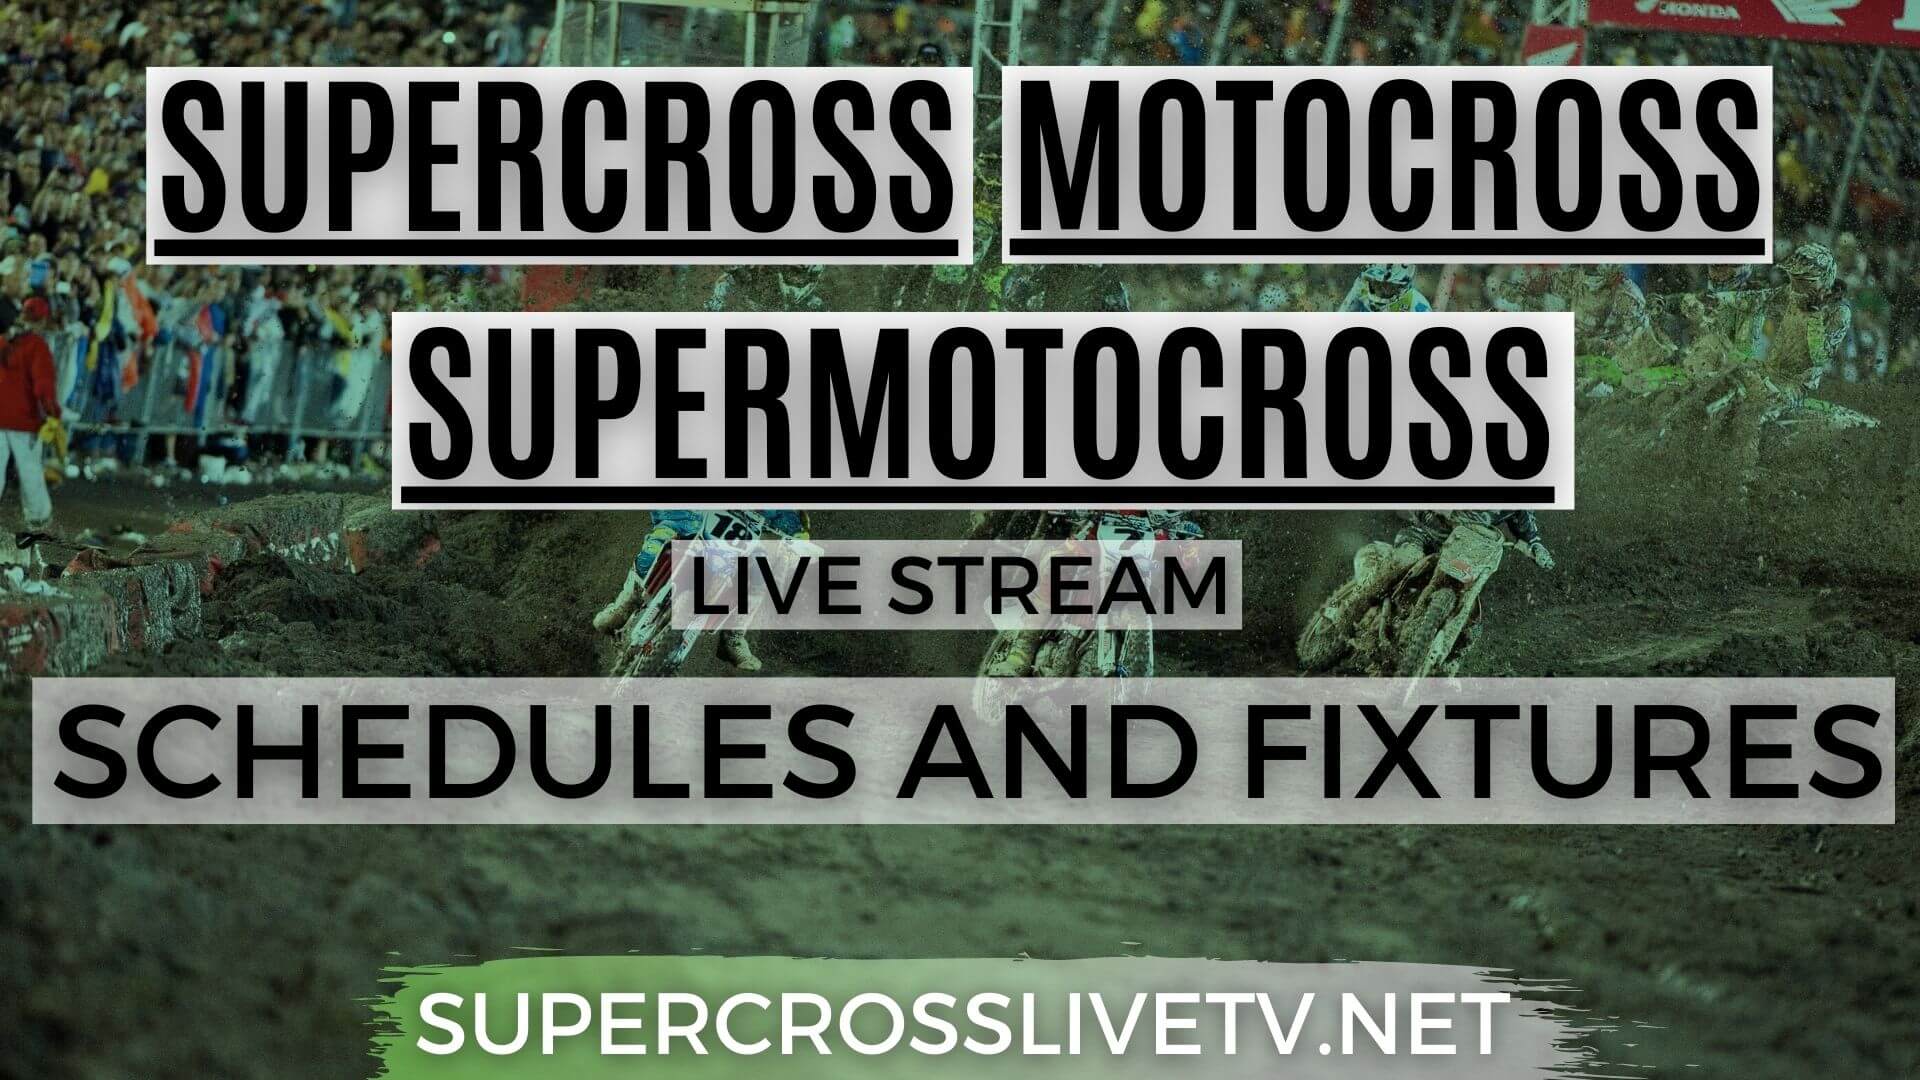 Supercross & Motocross 2023 Schedules and Fixtures AMA SX, MX & SMX